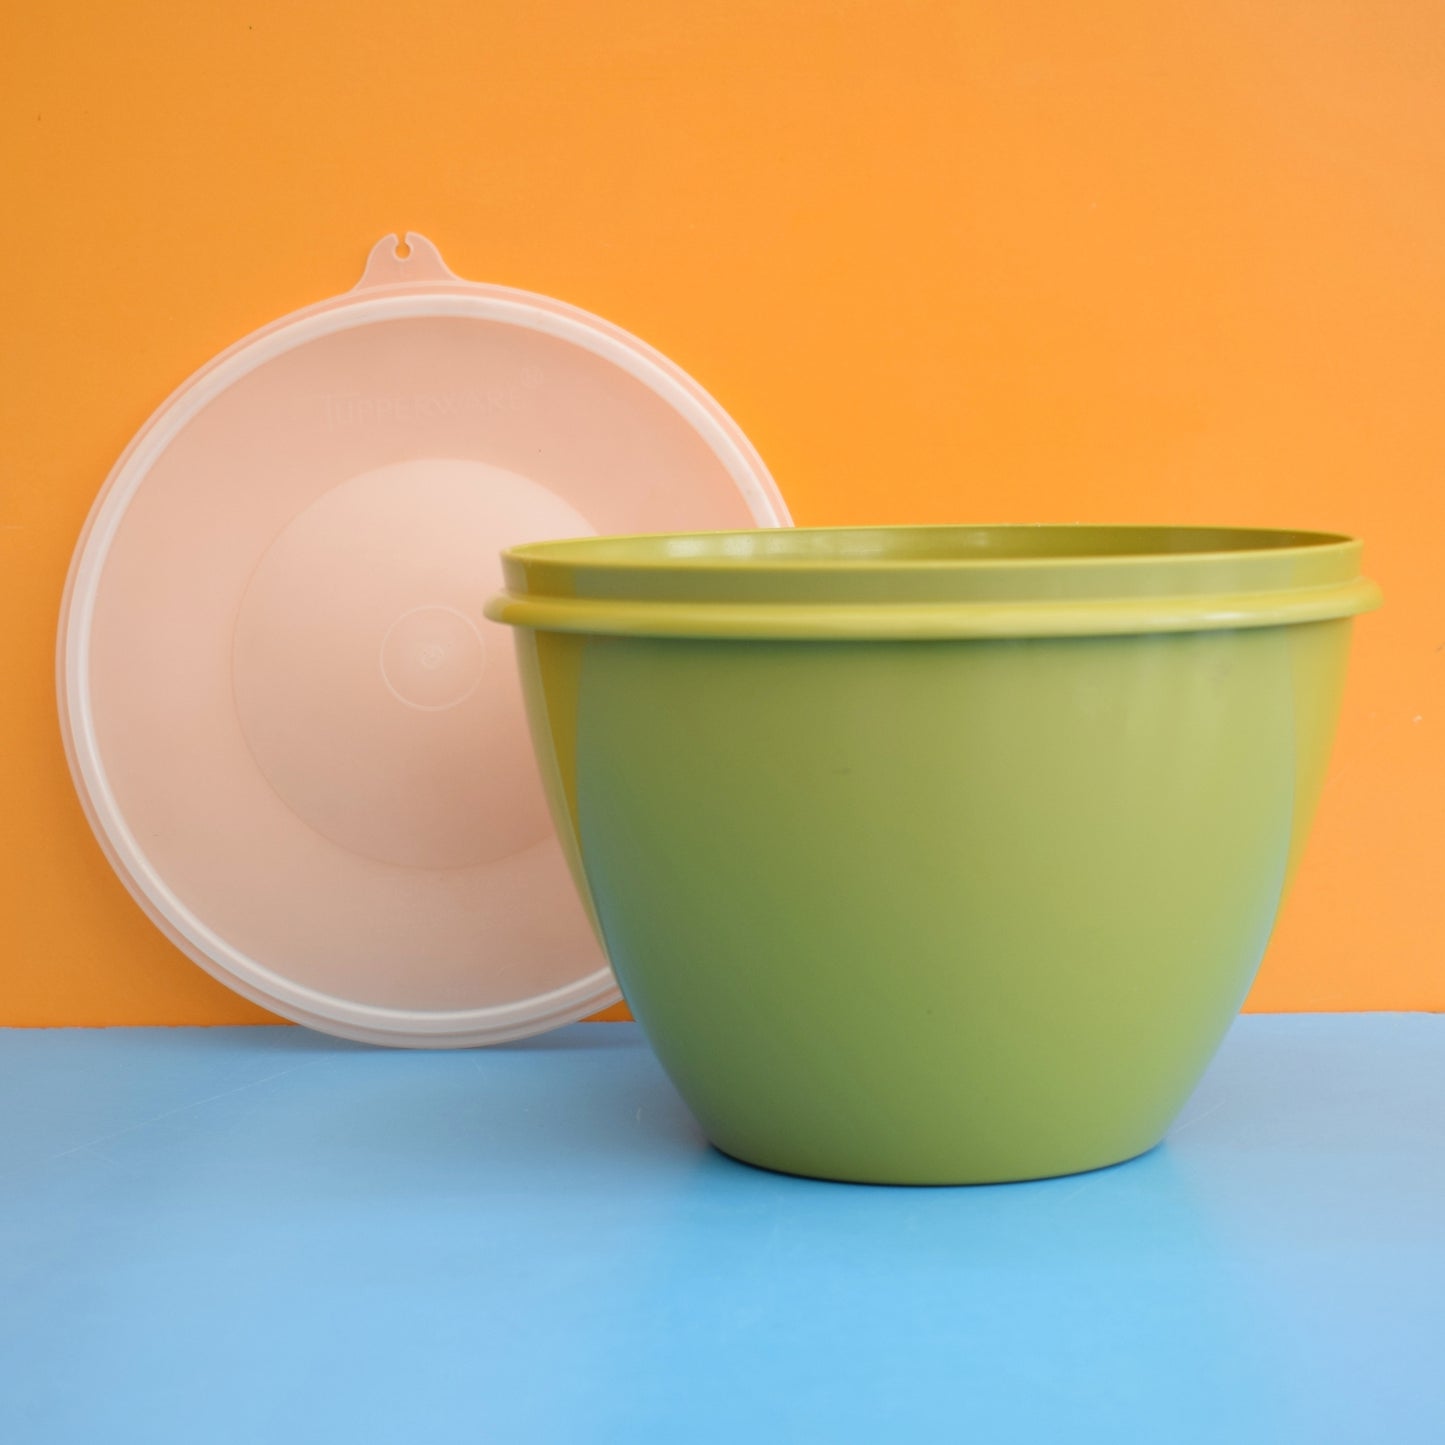 Vintage 1960s Tupperware Container/ Scoops- Green